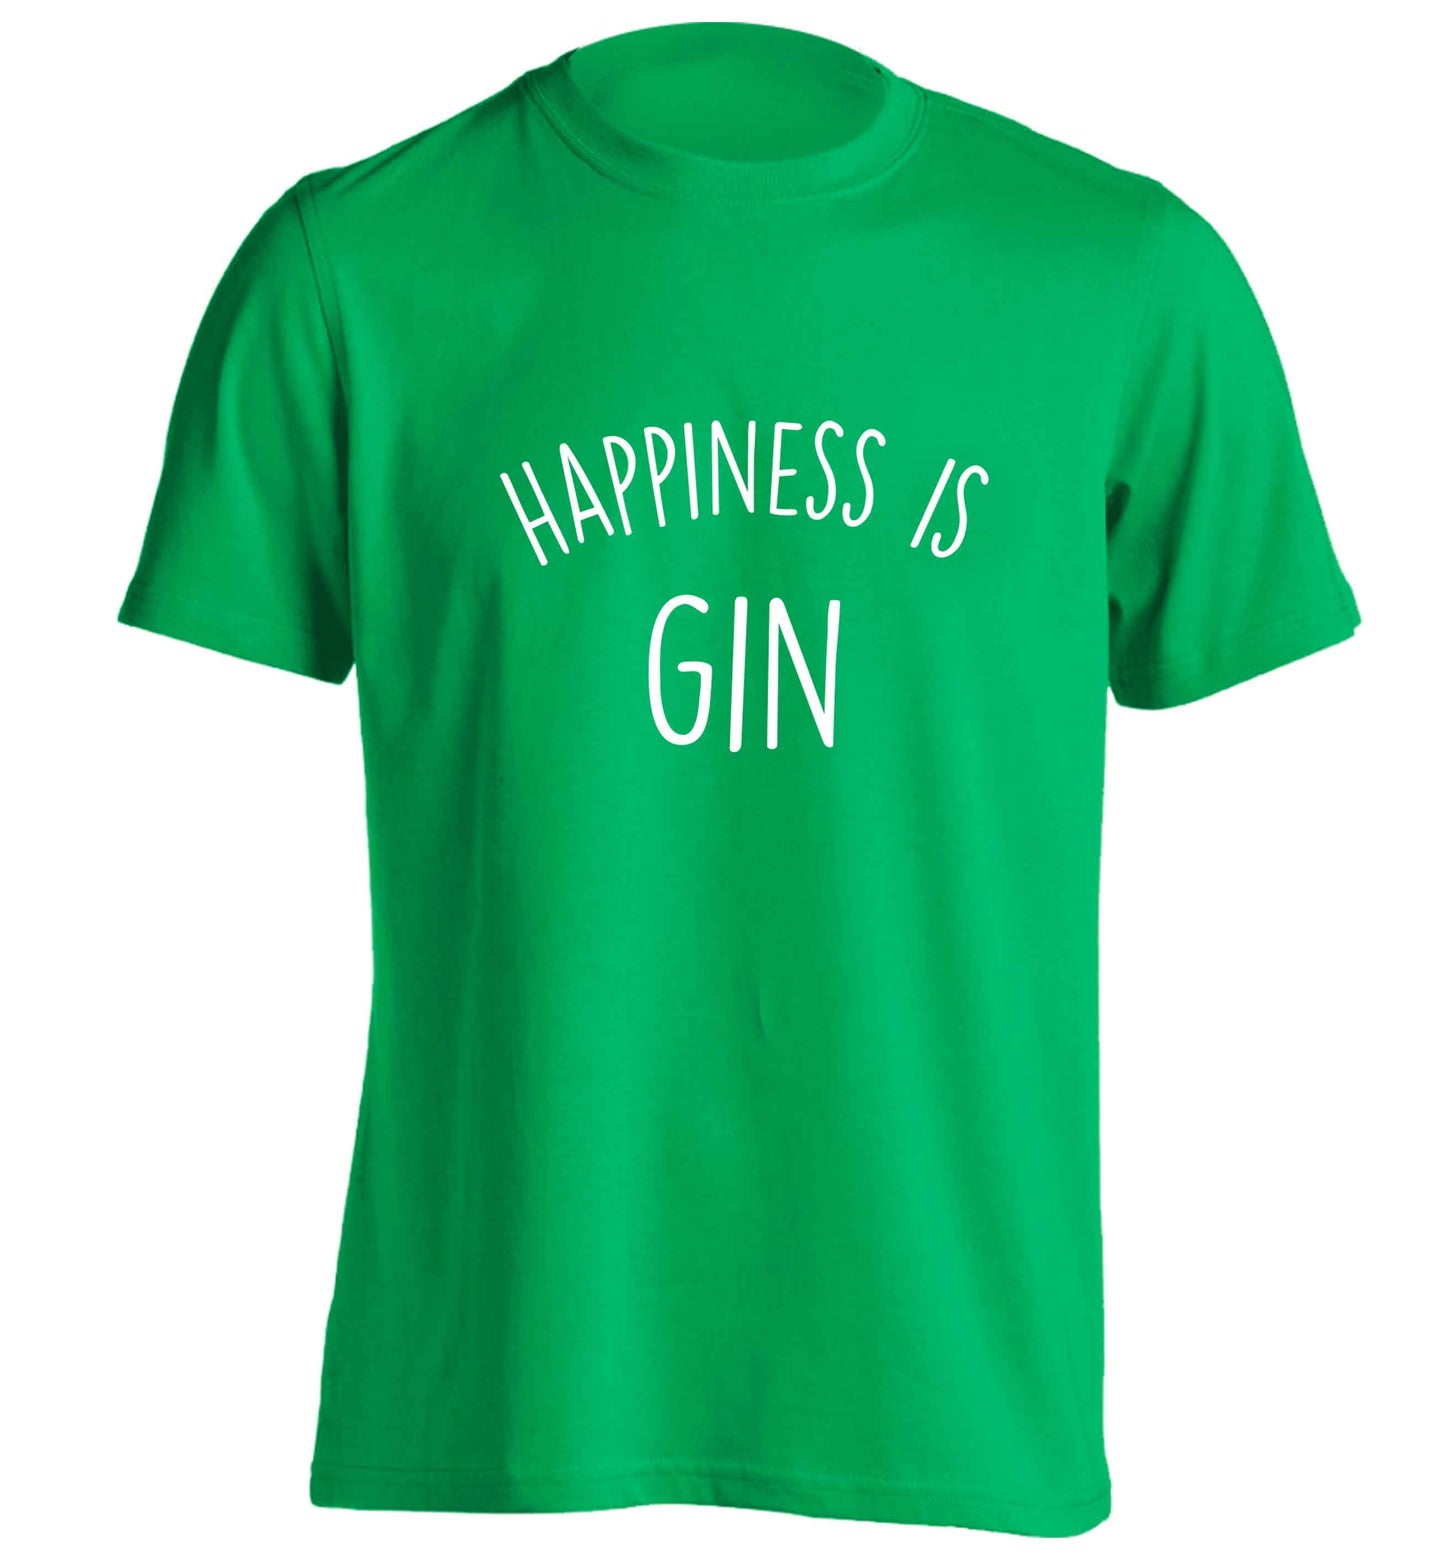 Happiness is gin adults unisex green Tshirt 2XL